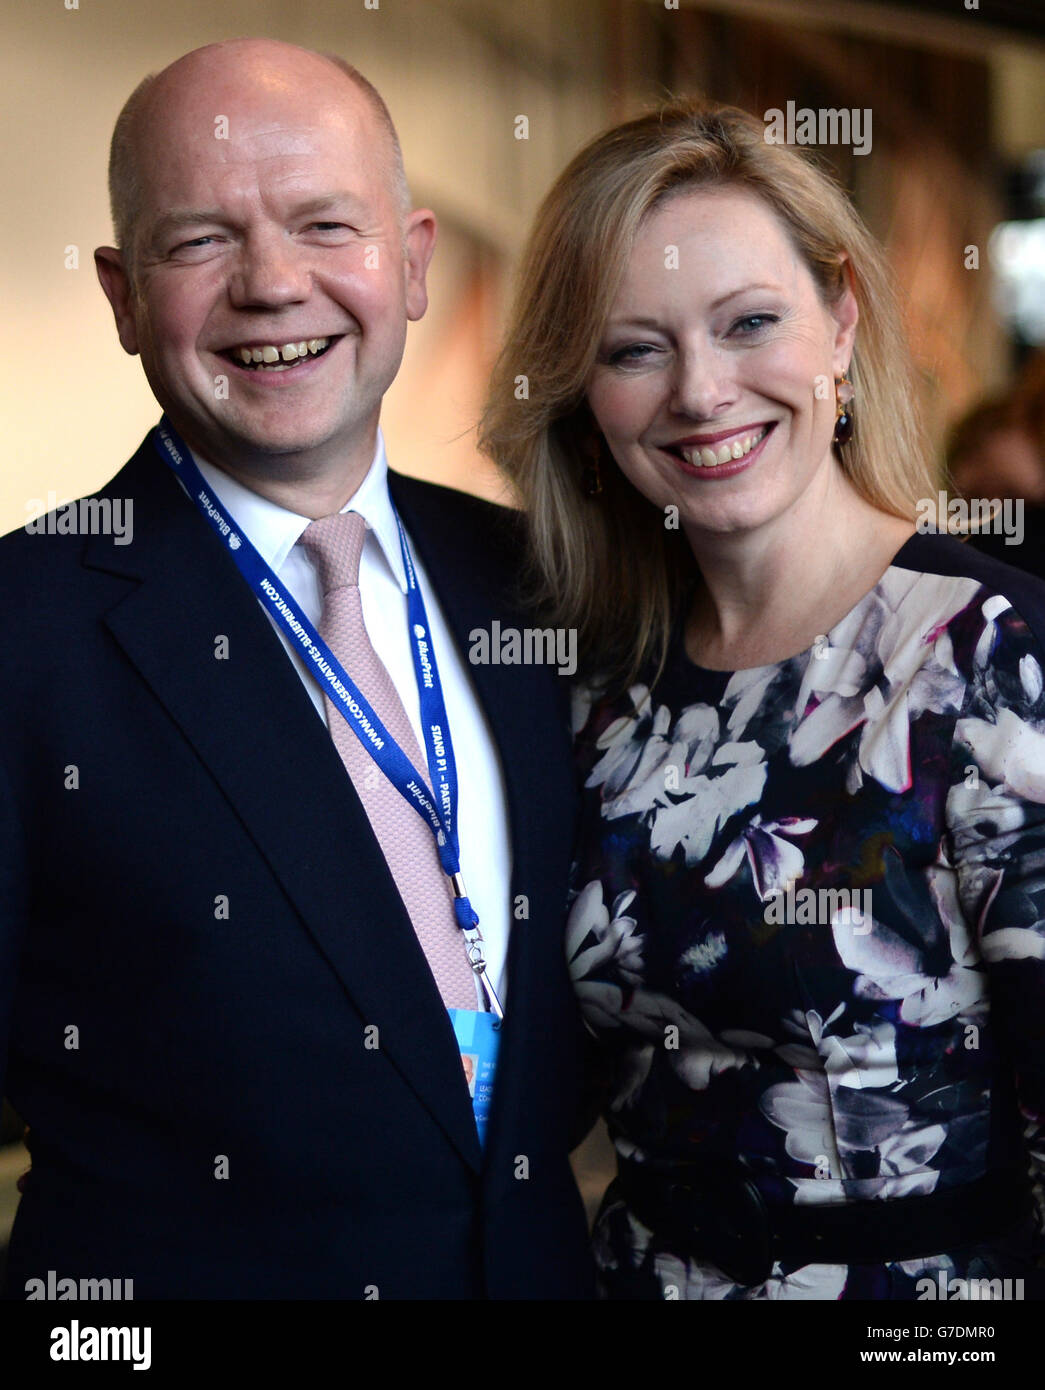 Leader of the House William Hague and his wife Ffion after addressing the Conservative Party annual conference held at the International Convention Centre in Birmingham, in an emotional final address. Stock Photo